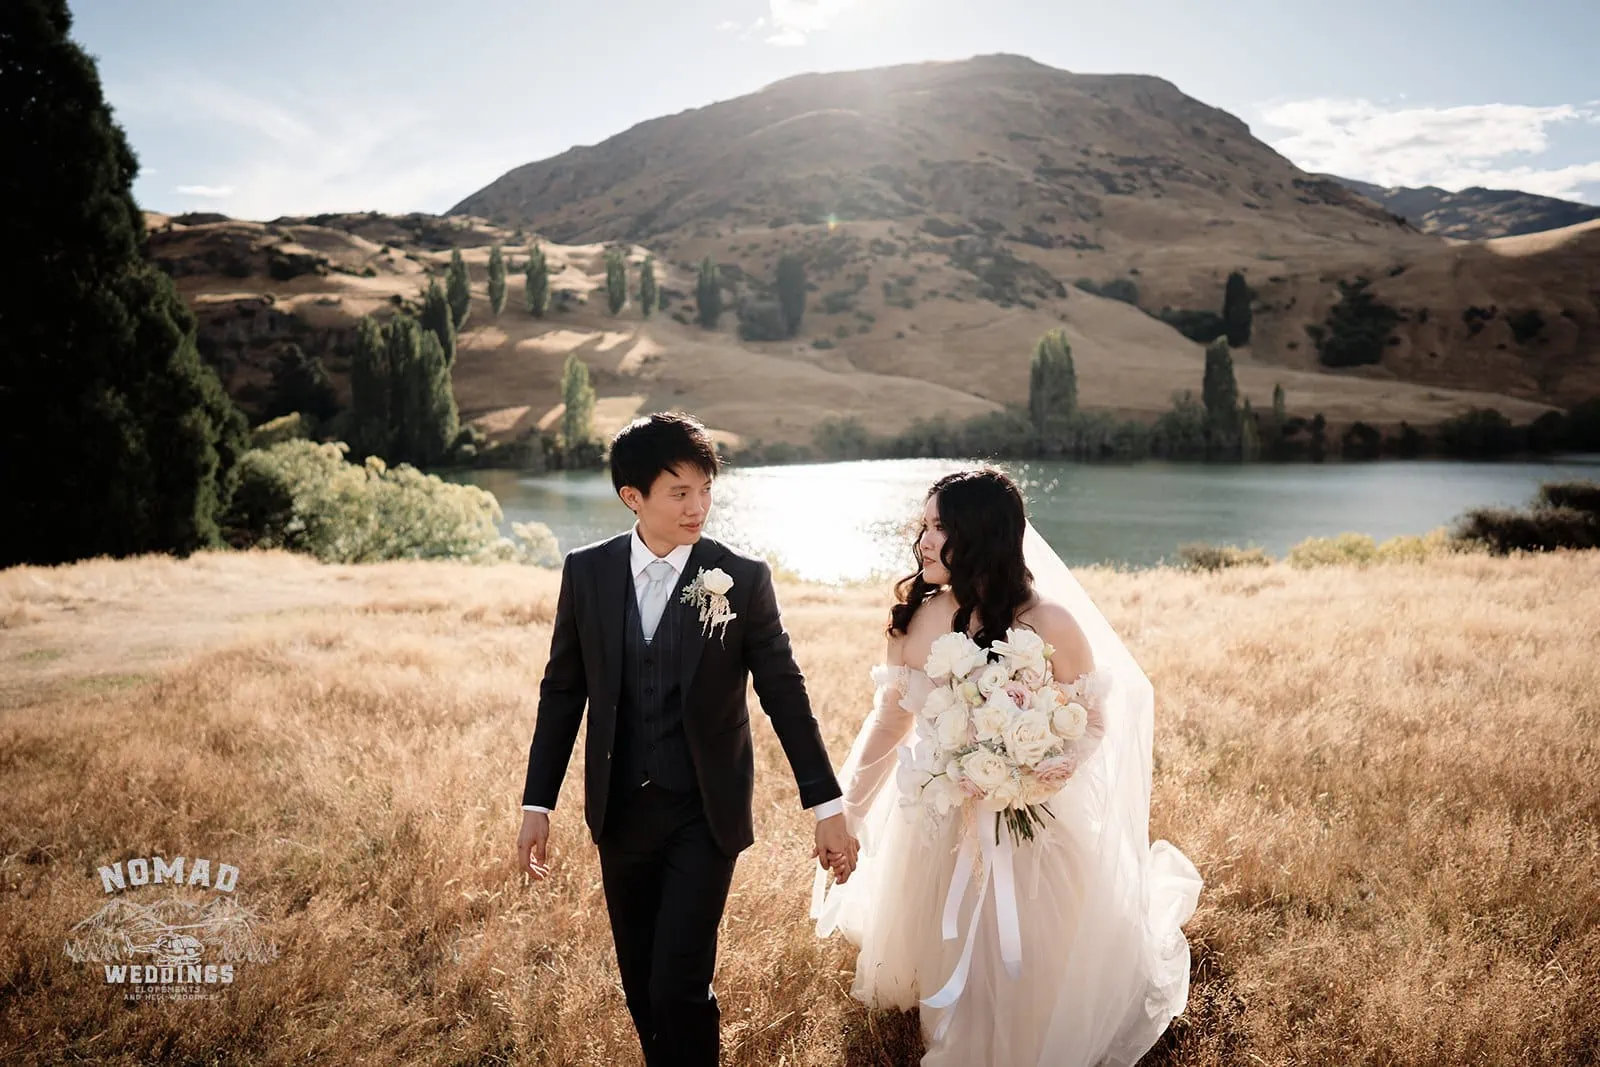 Queenstown New Zealand Elopement Wedding Photographer - A couple strolling through a scenic field by a lake in Queenstown during the summer.